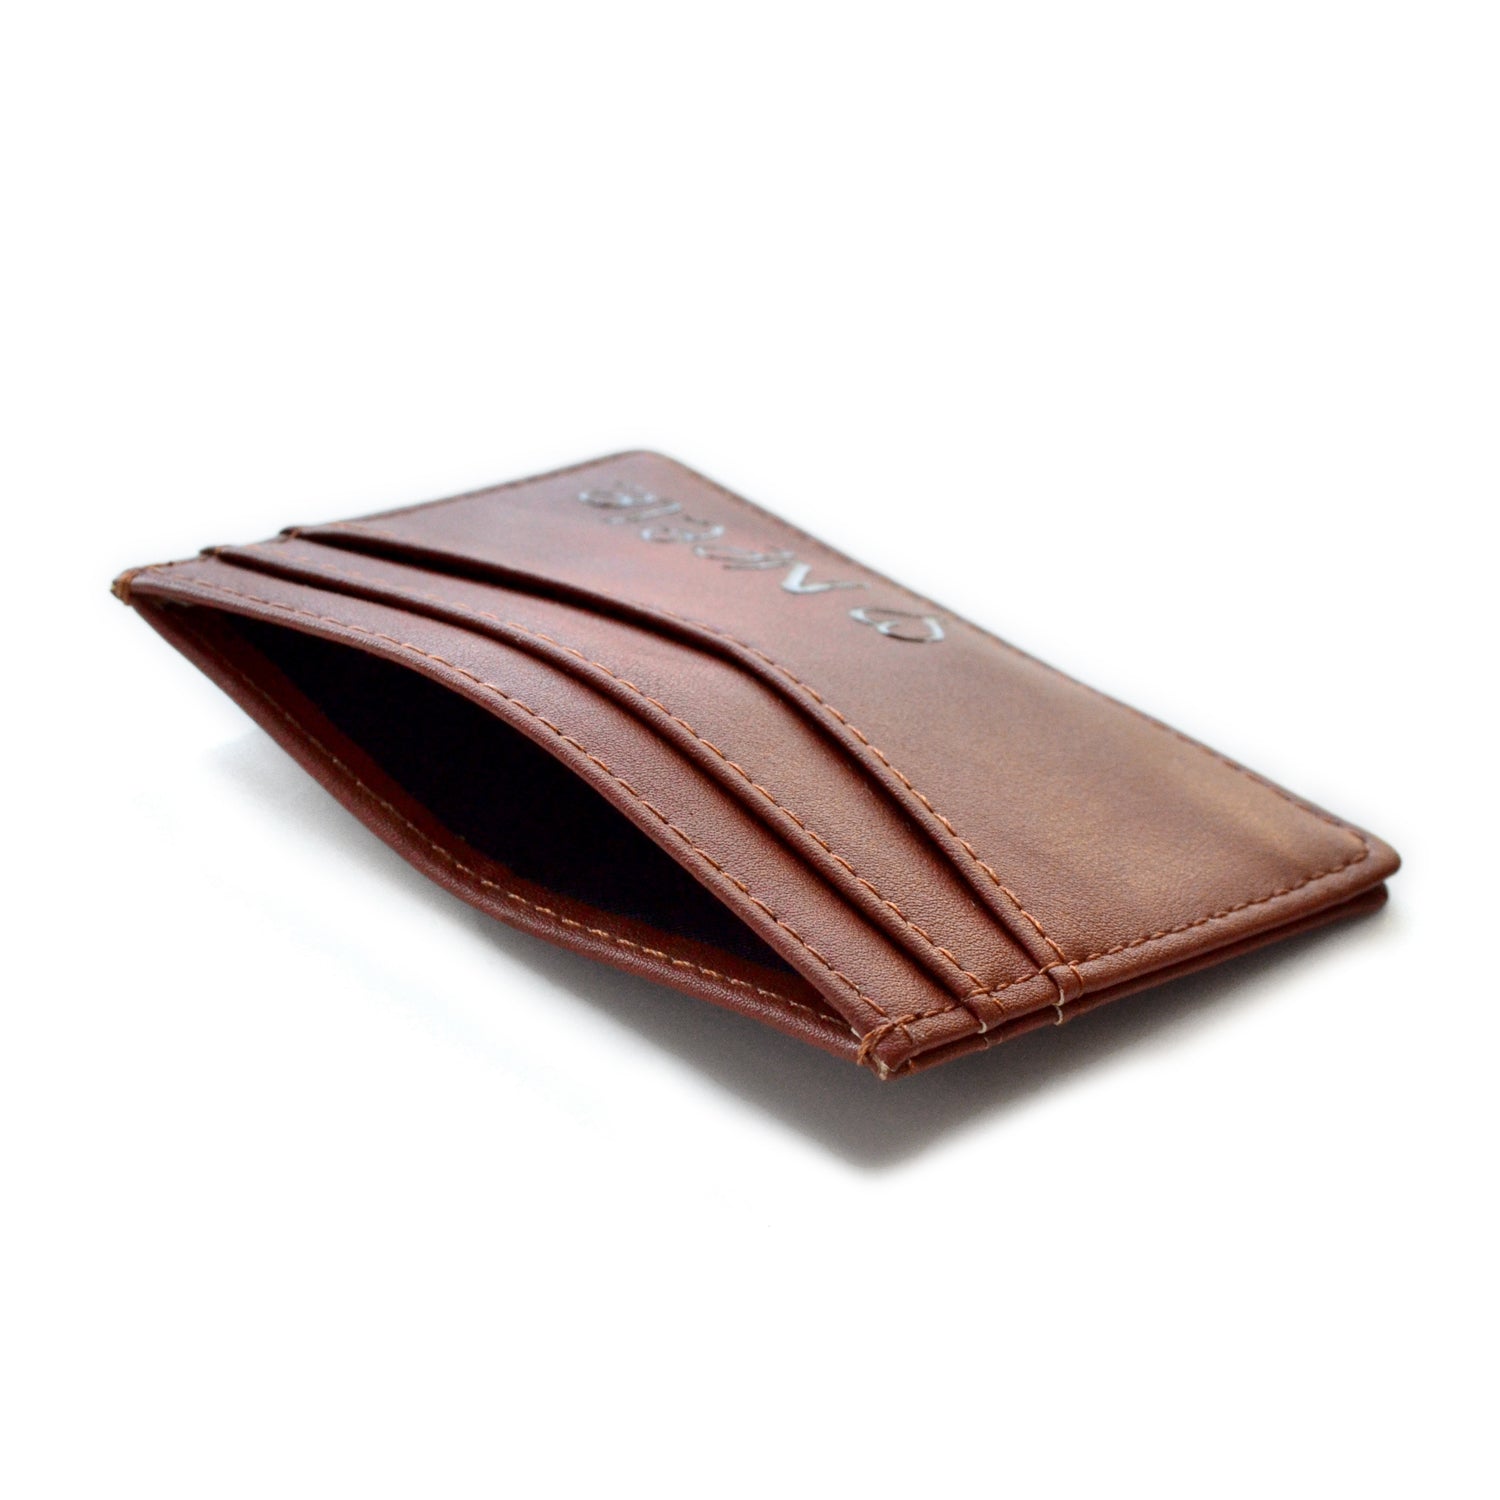 Personalized PU Leather Cardholder with Monogram or Signature